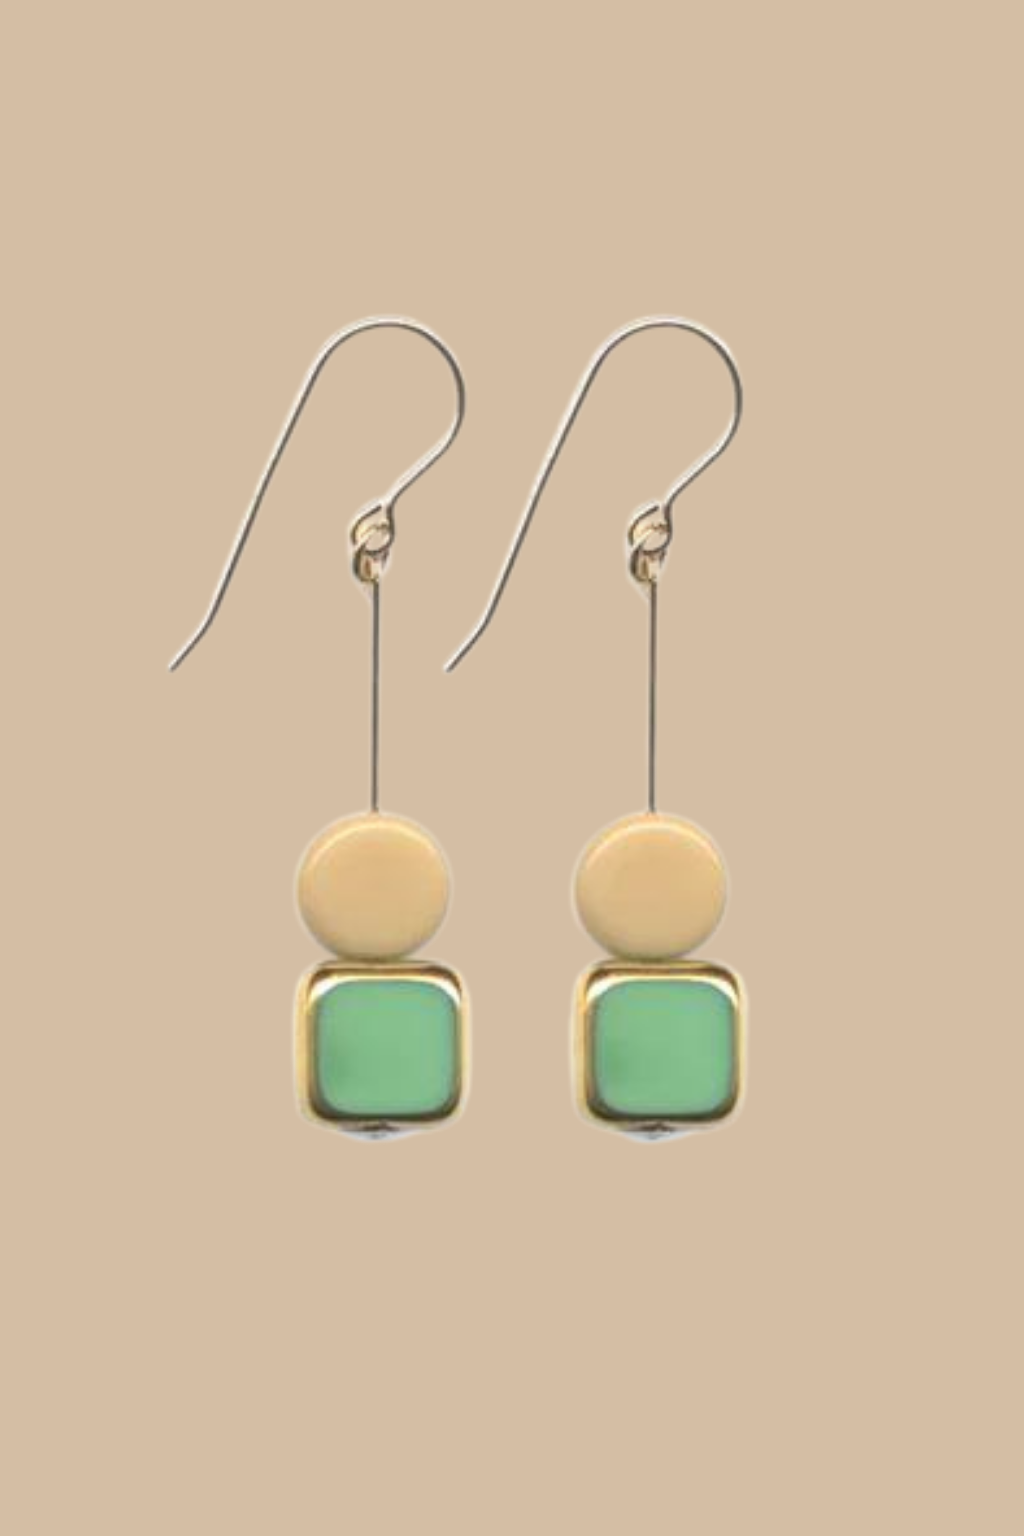 Green Square and Cream Circle Earrings